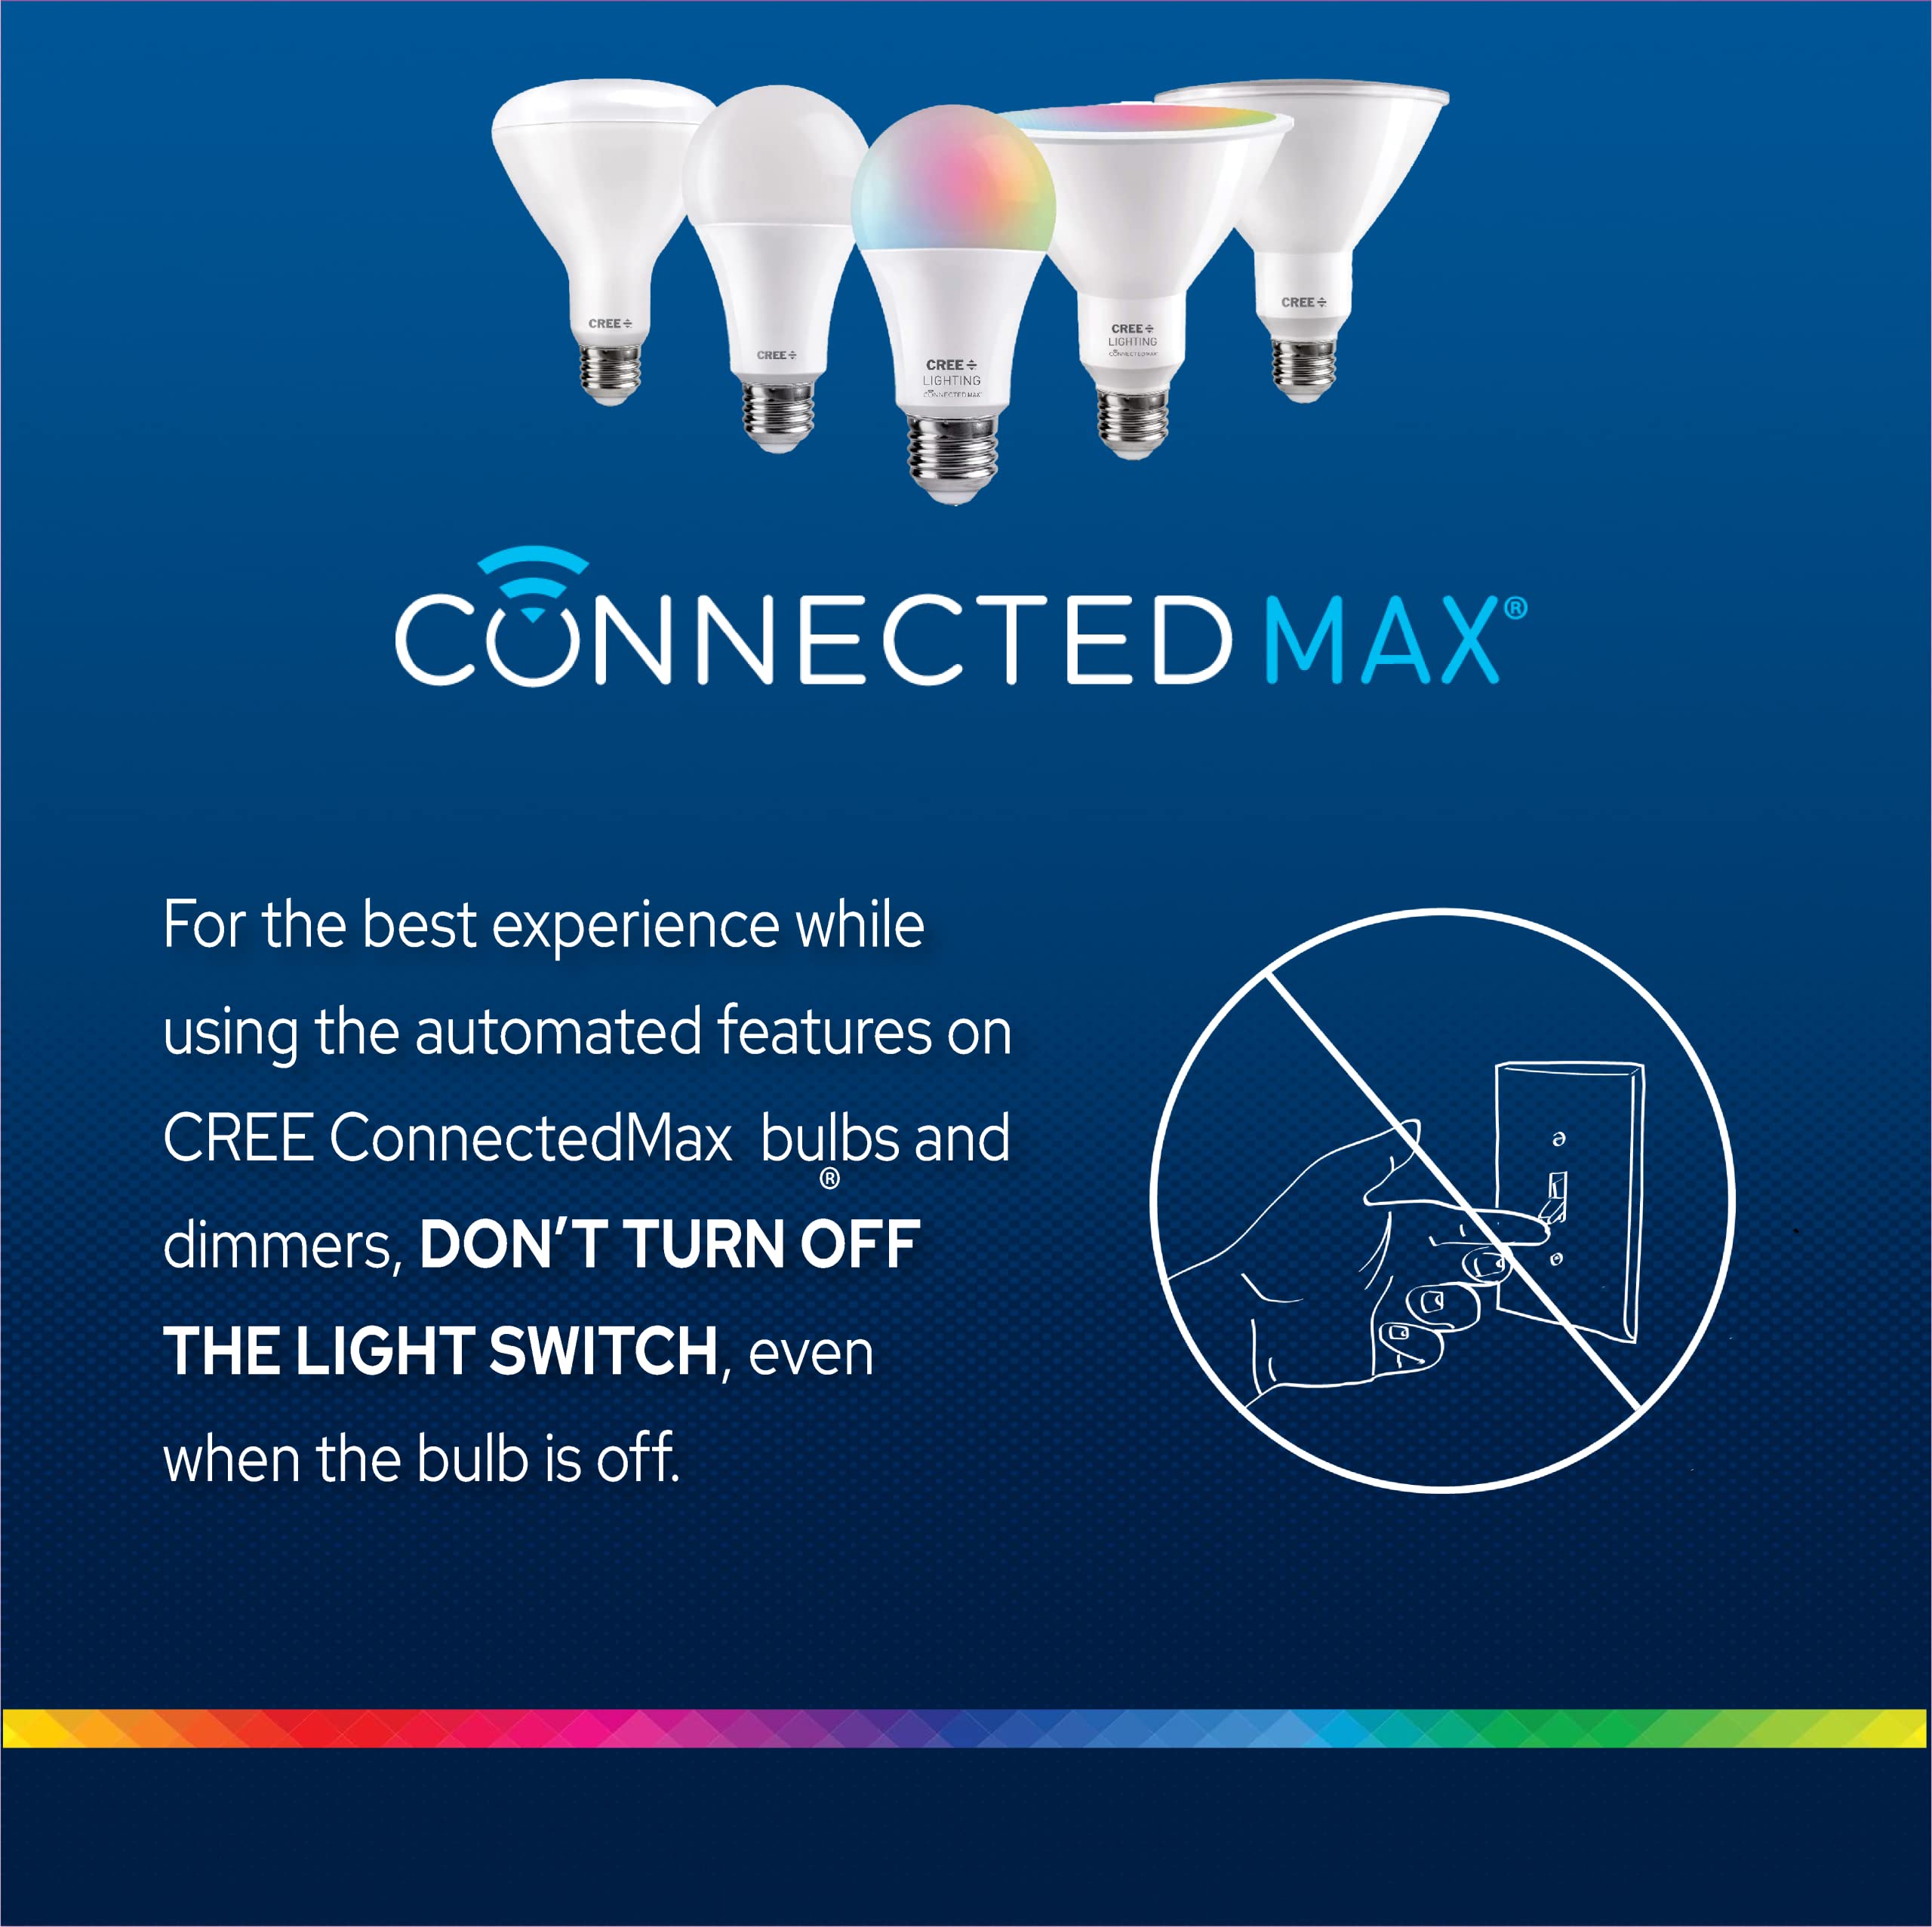 Cree Lighting Connected Max Smart Led Bulb Par38 Outdoor Flood Tunable White + Color Changing, 2.4 Ghz, Compatible With Alexa And Google Home, No Hub Required, Bluetooth + Wifi, Pack of 4